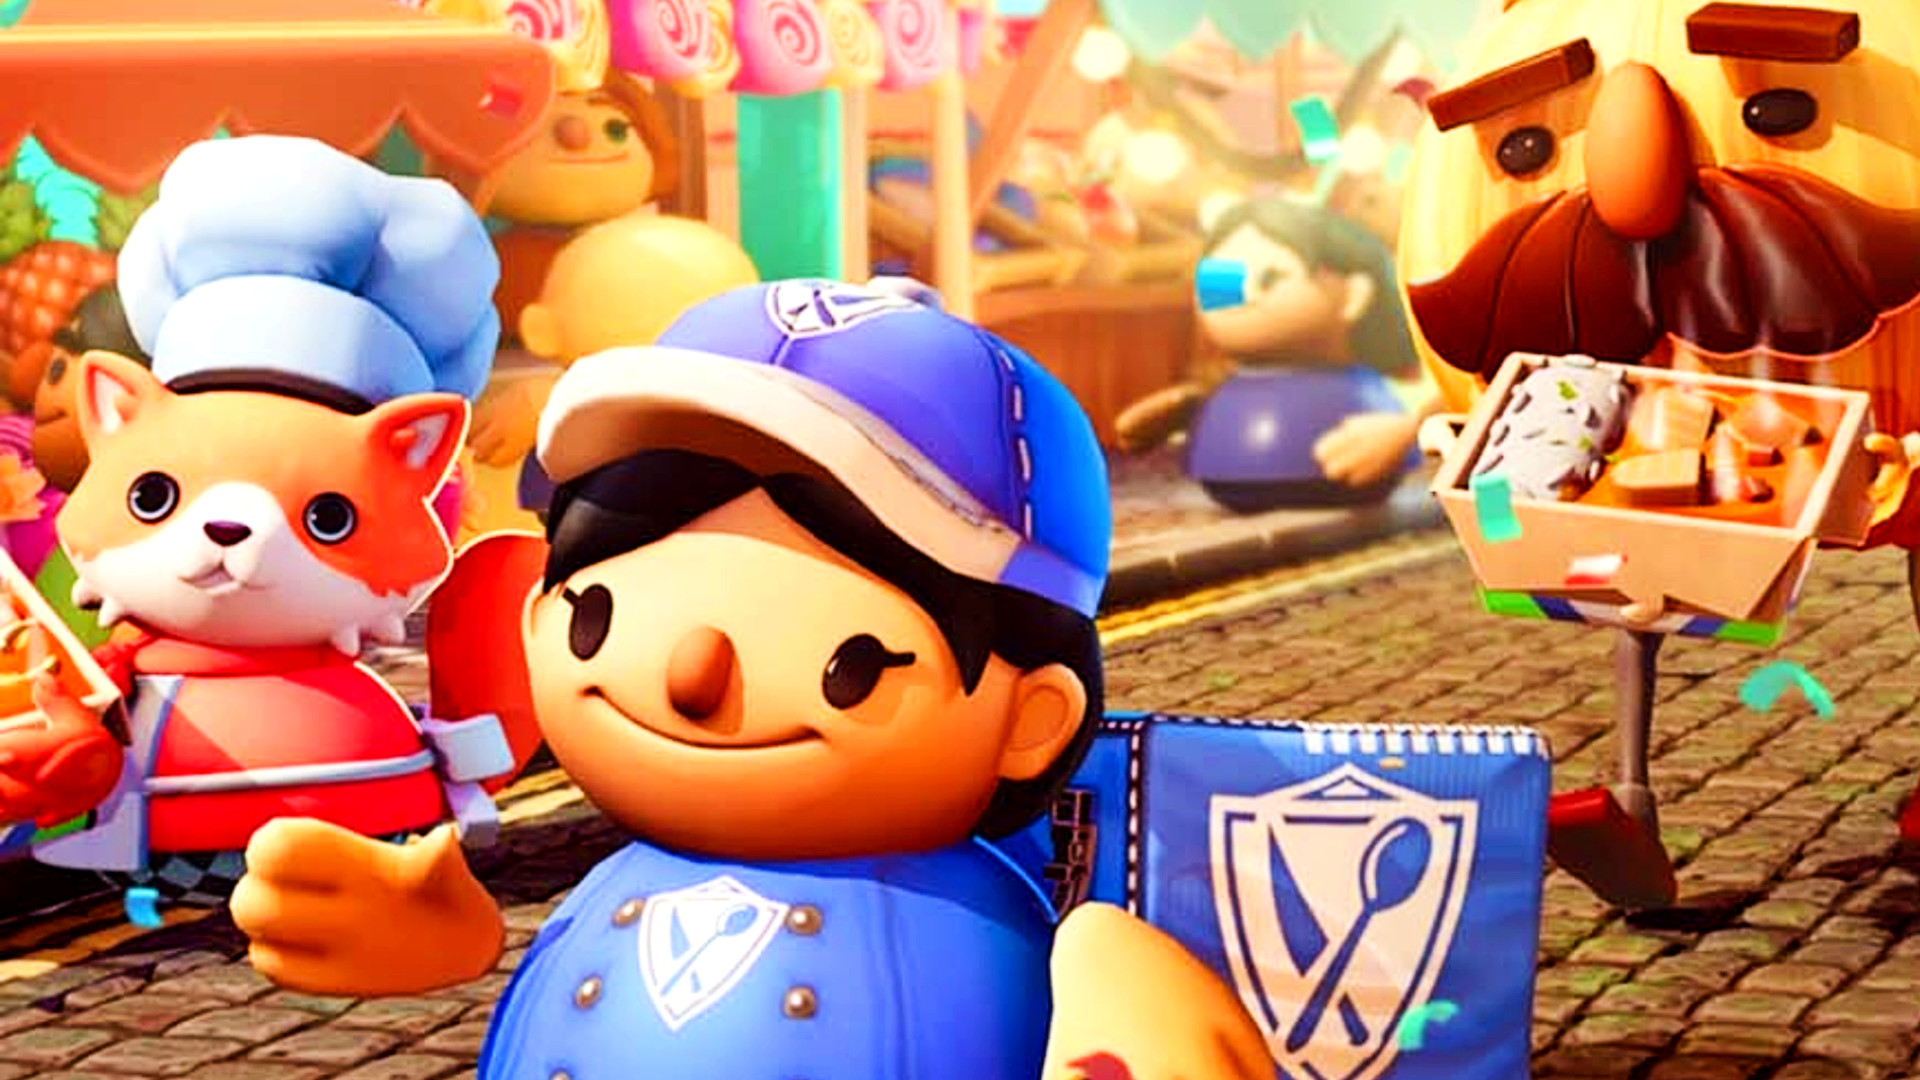 New Overcooked free levels come to multiplayer game for World Food Day